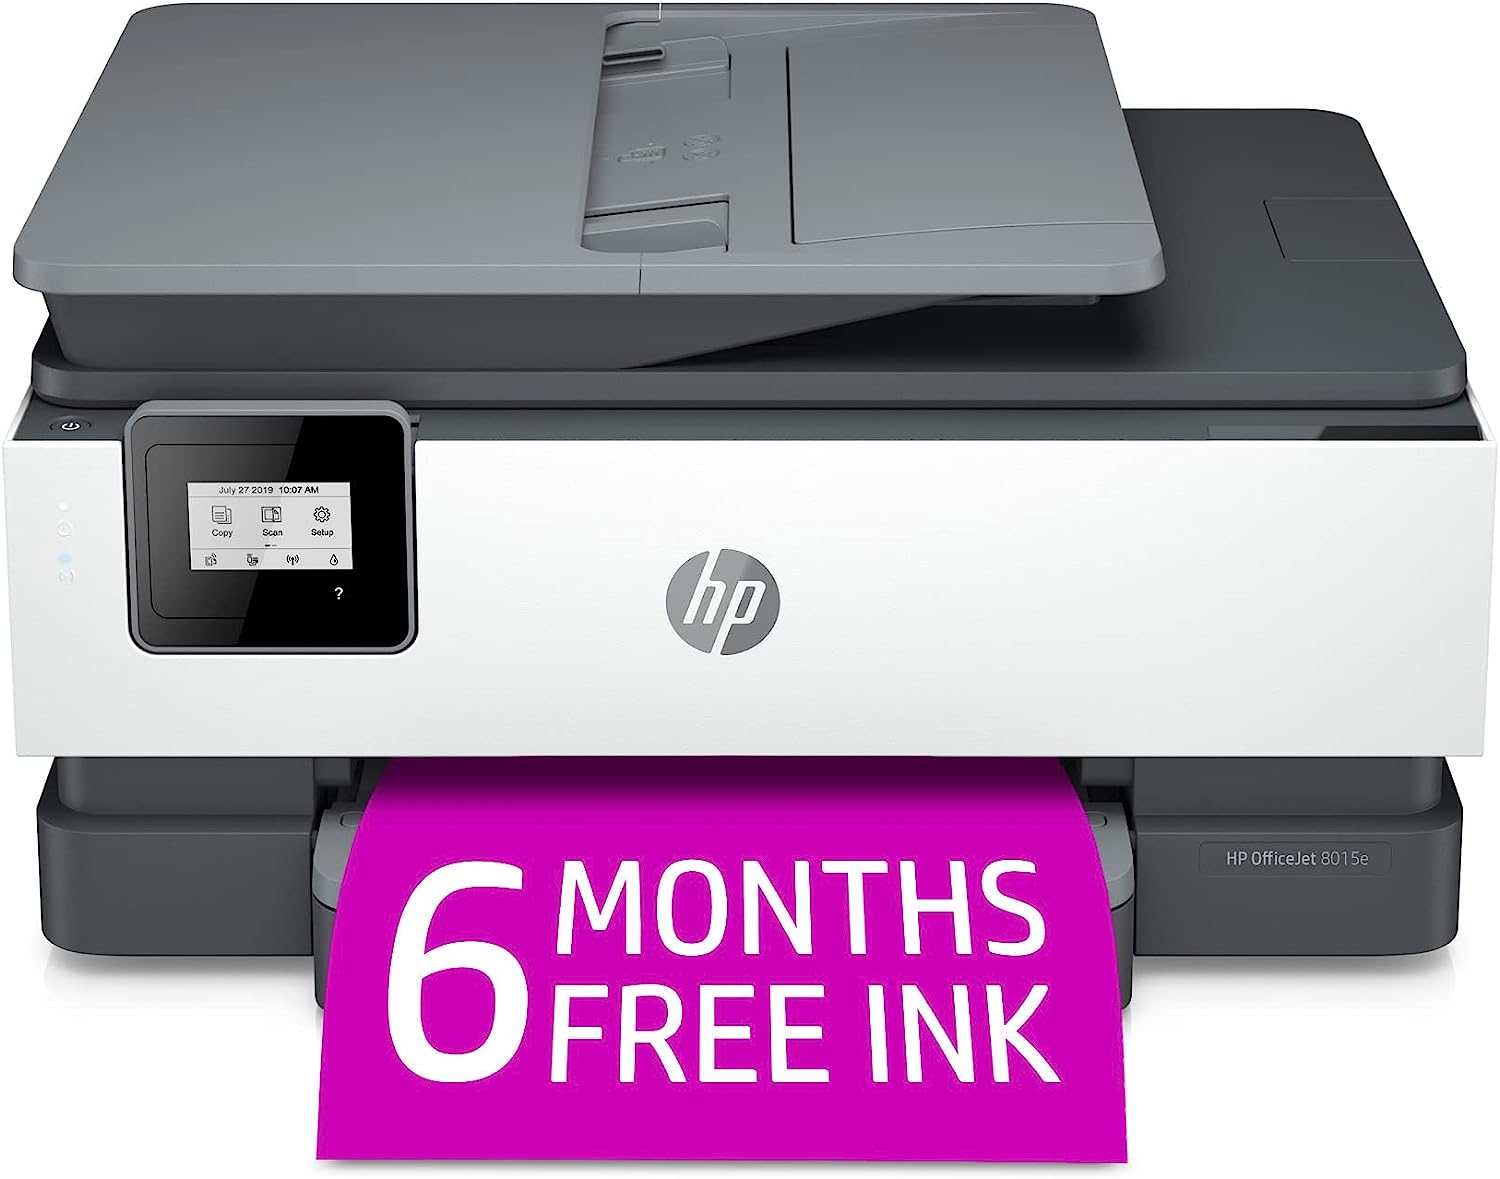 HP OfficeJet 8015e Wireless Color All-in-One Printer [...]